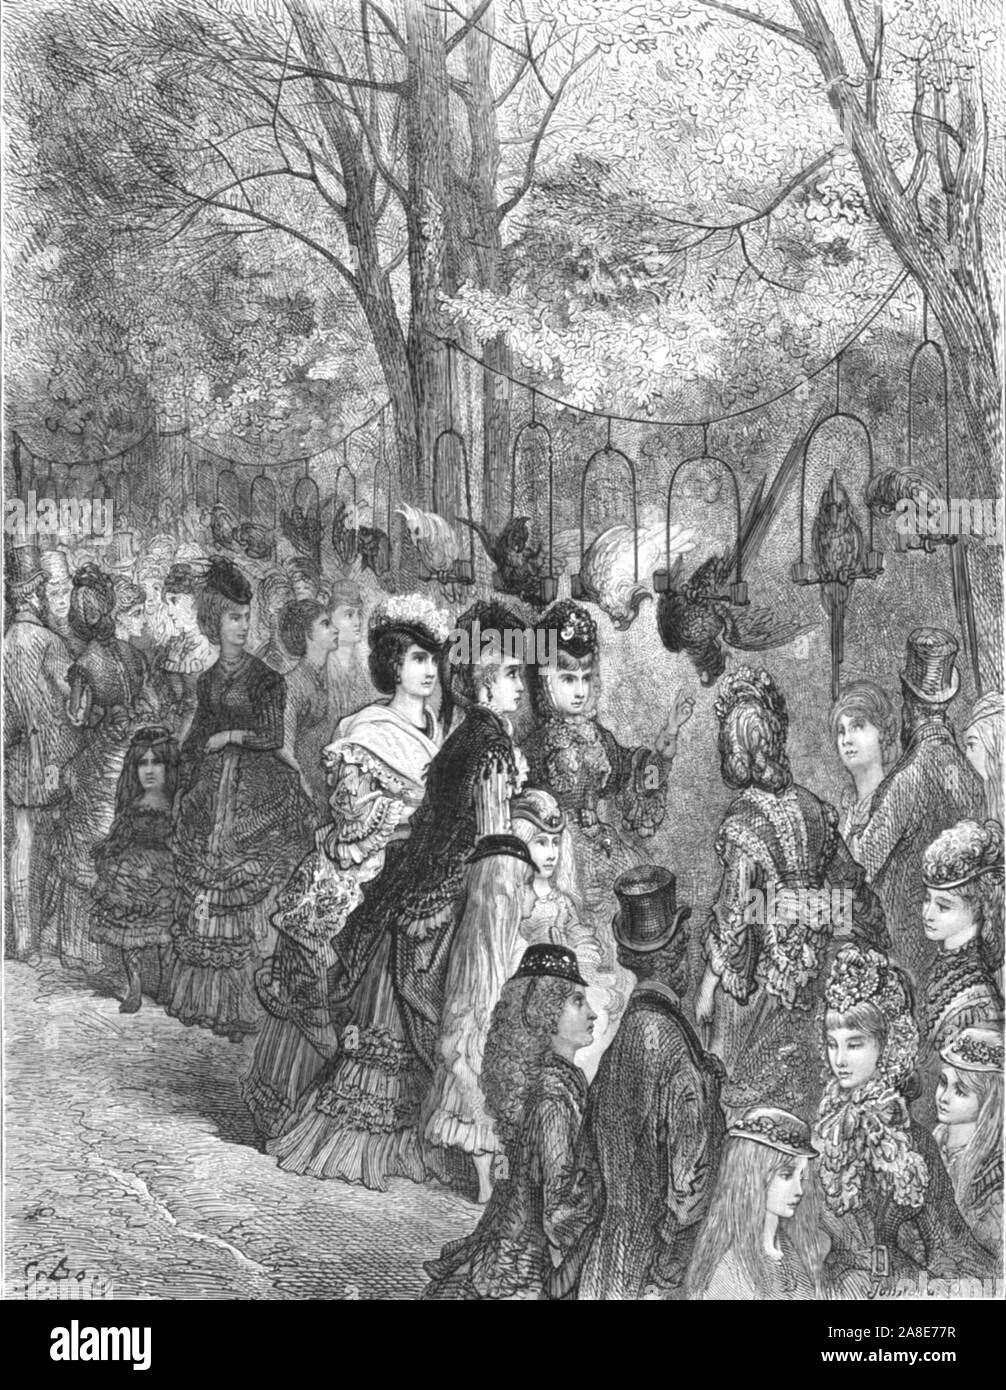 'Zoological Gardens-The Parrot Walk', 1872. The Zoological Society of London was founded by Stamford Raffles in 1826, London Zoo opened two years' later. From, &quot;LONDON. A Pilgrimage&quot; by Gustave Dore and Blanchard Jerrold. [Grant and Co., 72-78, Turnmill Street, E.C., 1872]. Stock Photo